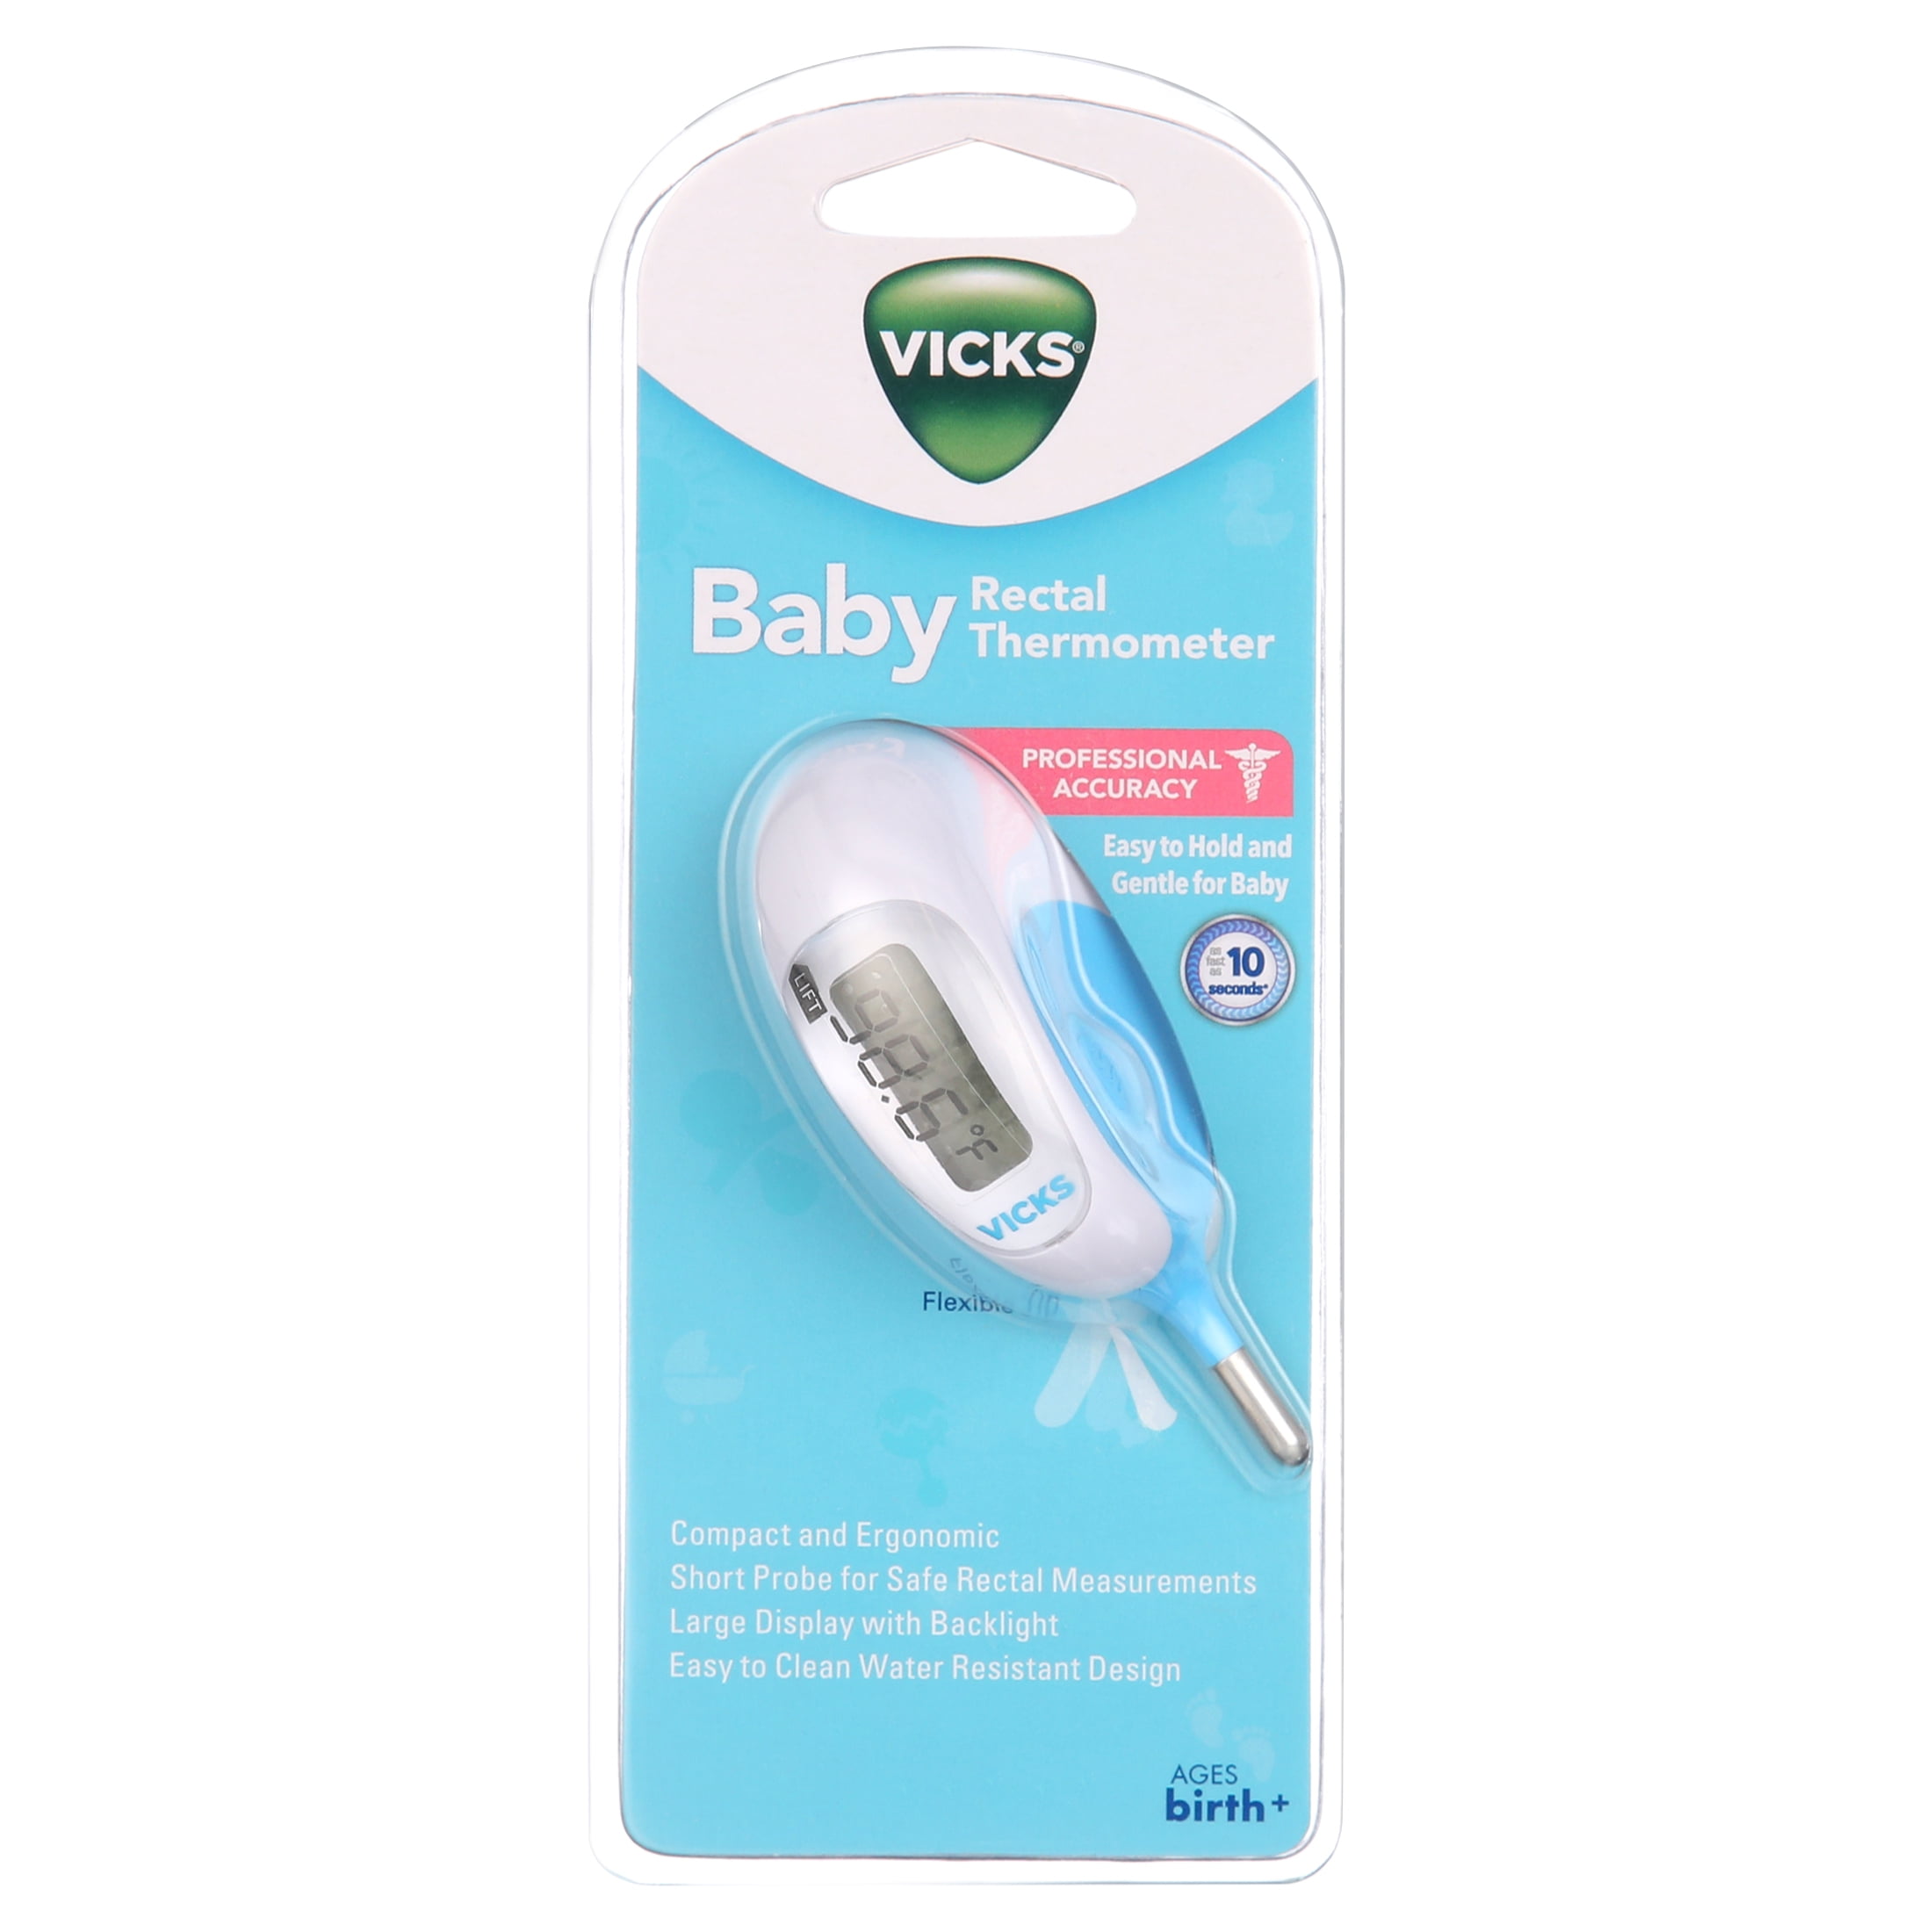 Vicks Baby Rectal Thermometer with Flexible Tip and Waterproof